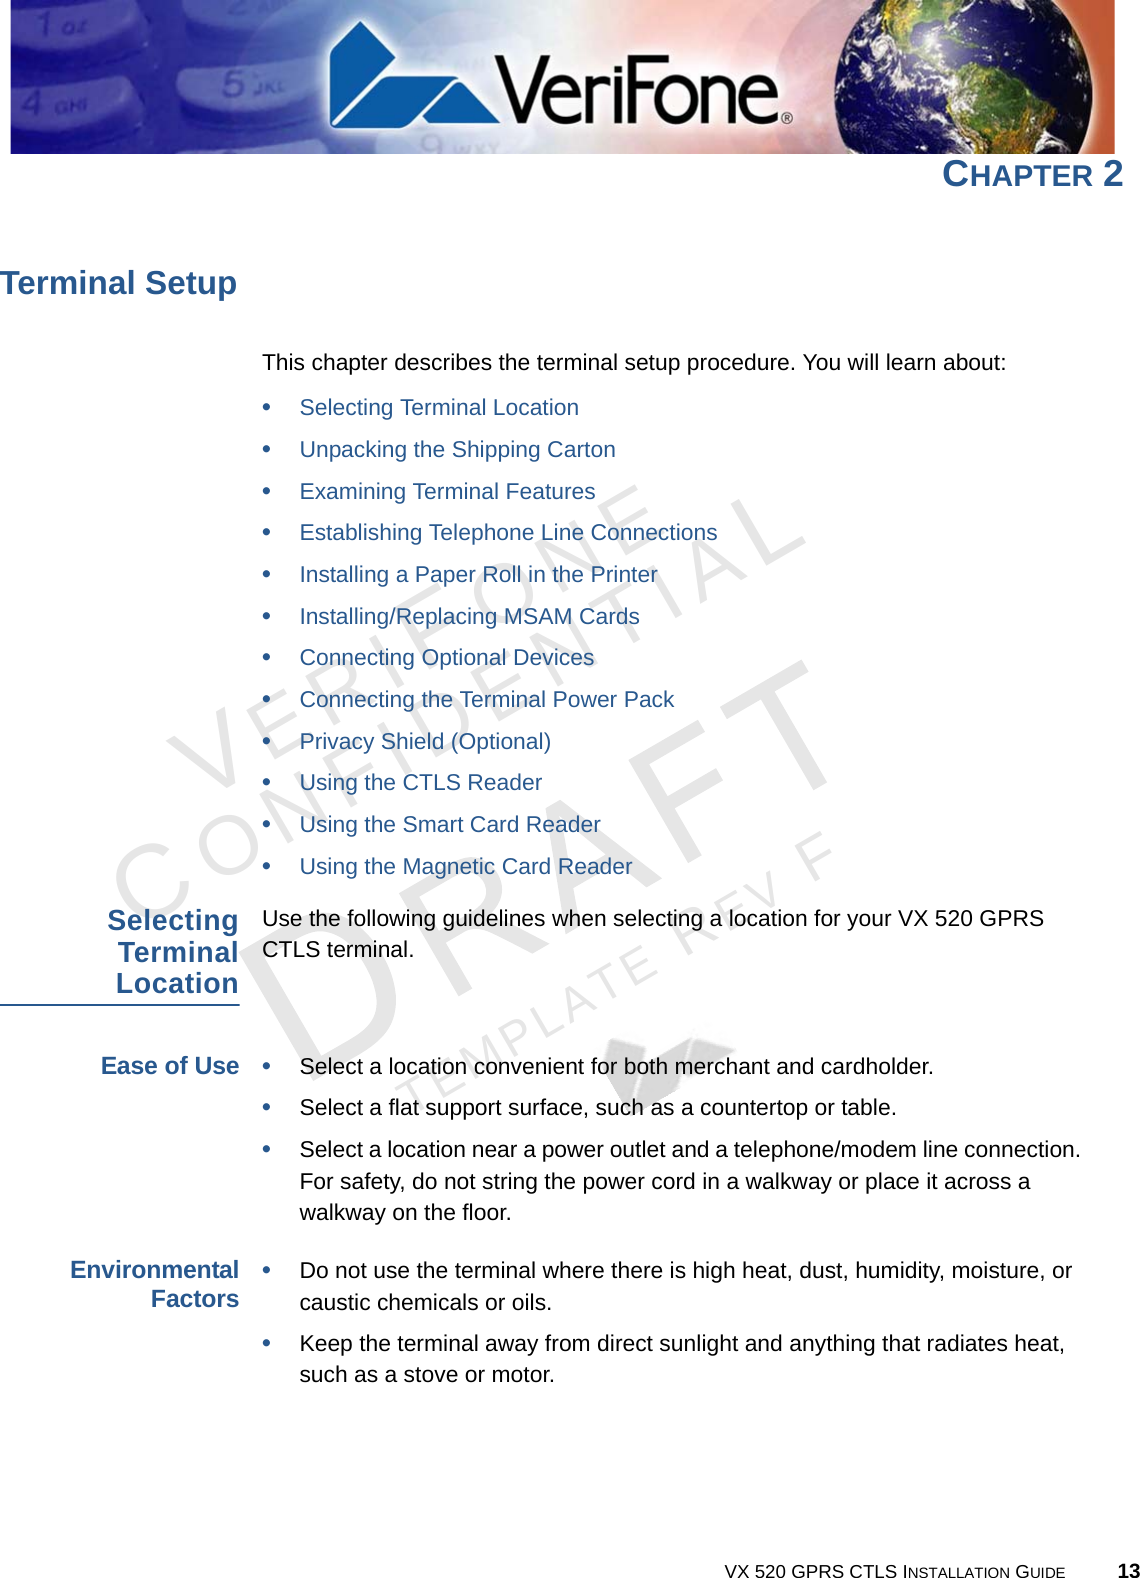 VERIFONECONFIDENTIALTEMPLATE REV F VX 520 GPRS CTLS INSTALLATION GUIDE 13CHAPTER 2Terminal SetupThis chapter describes the terminal setup procedure. You will learn about: •Selecting Terminal Location•Unpacking the Shipping Carton•Examining Terminal Features•Establishing Telephone Line Connections•Installing a Paper Roll in the Printer•Installing/Replacing MSAM Cards•Connecting Optional Devices•Connecting the Terminal Power Pack•Privacy Shield (Optional)•Using the CTLS Reader•Using the Smart Card Reader•Using the Magnetic Card ReaderSelectingTerminalLocationUse the following guidelines when selecting a location for your VX 520 GPRS CTLS terminal. Ease of Use•Select a location convenient for both merchant and cardholder.•Select a flat support surface, such as a countertop or table.•Select a location near a power outlet and a telephone/modem line connection. For safety, do not string the power cord in a walkway or place it across a walkway on the floor.EnvironmentalFactors•Do not use the terminal where there is high heat, dust, humidity, moisture, or caustic chemicals or oils.•Keep the terminal away from direct sunlight and anything that radiates heat, such as a stove or motor.